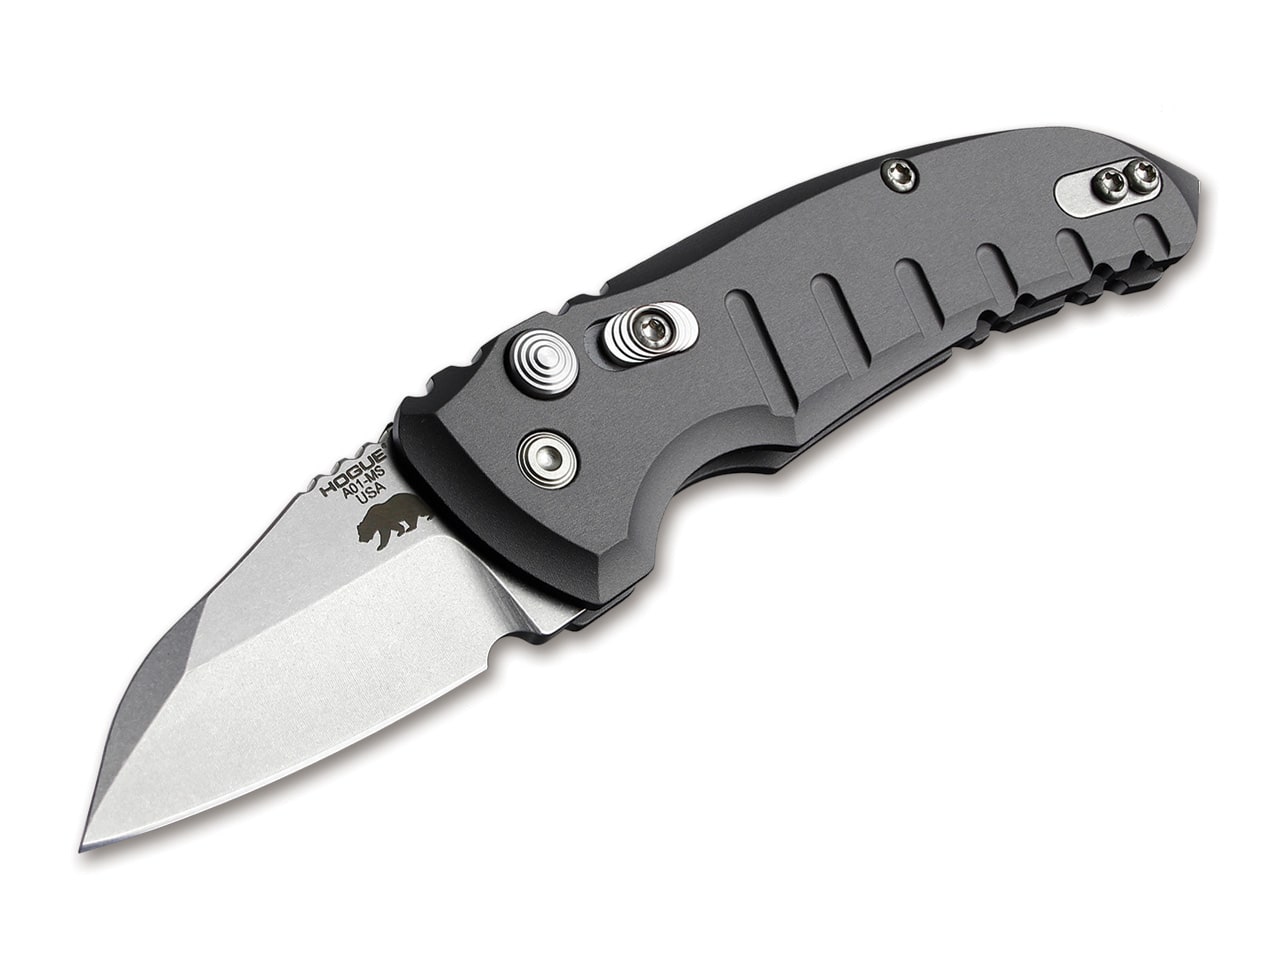 A01 Microswitch Compact Wharncliffe Grey